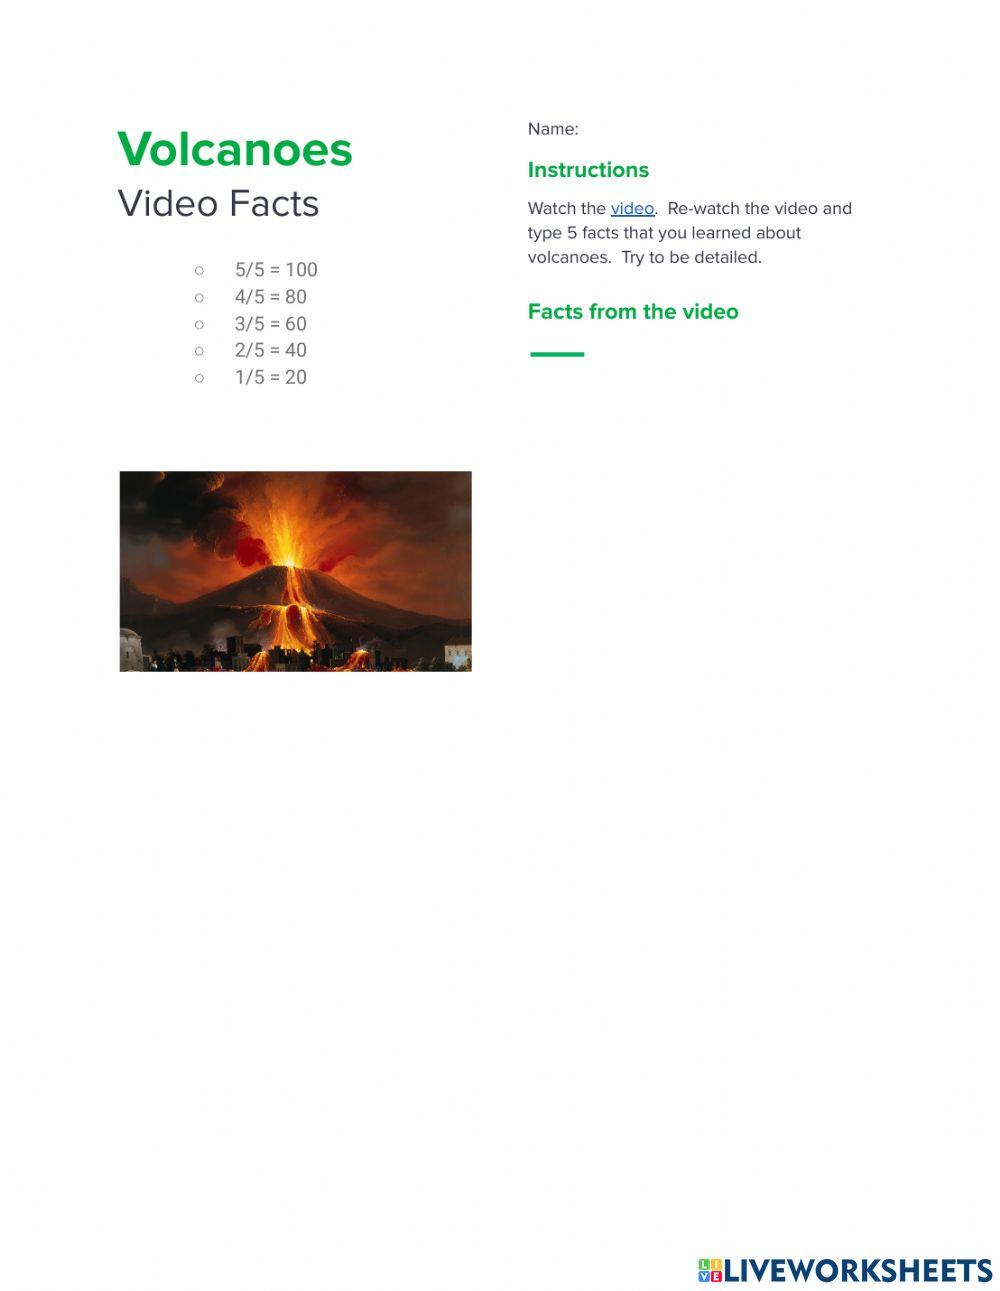 Volcano Video Facts